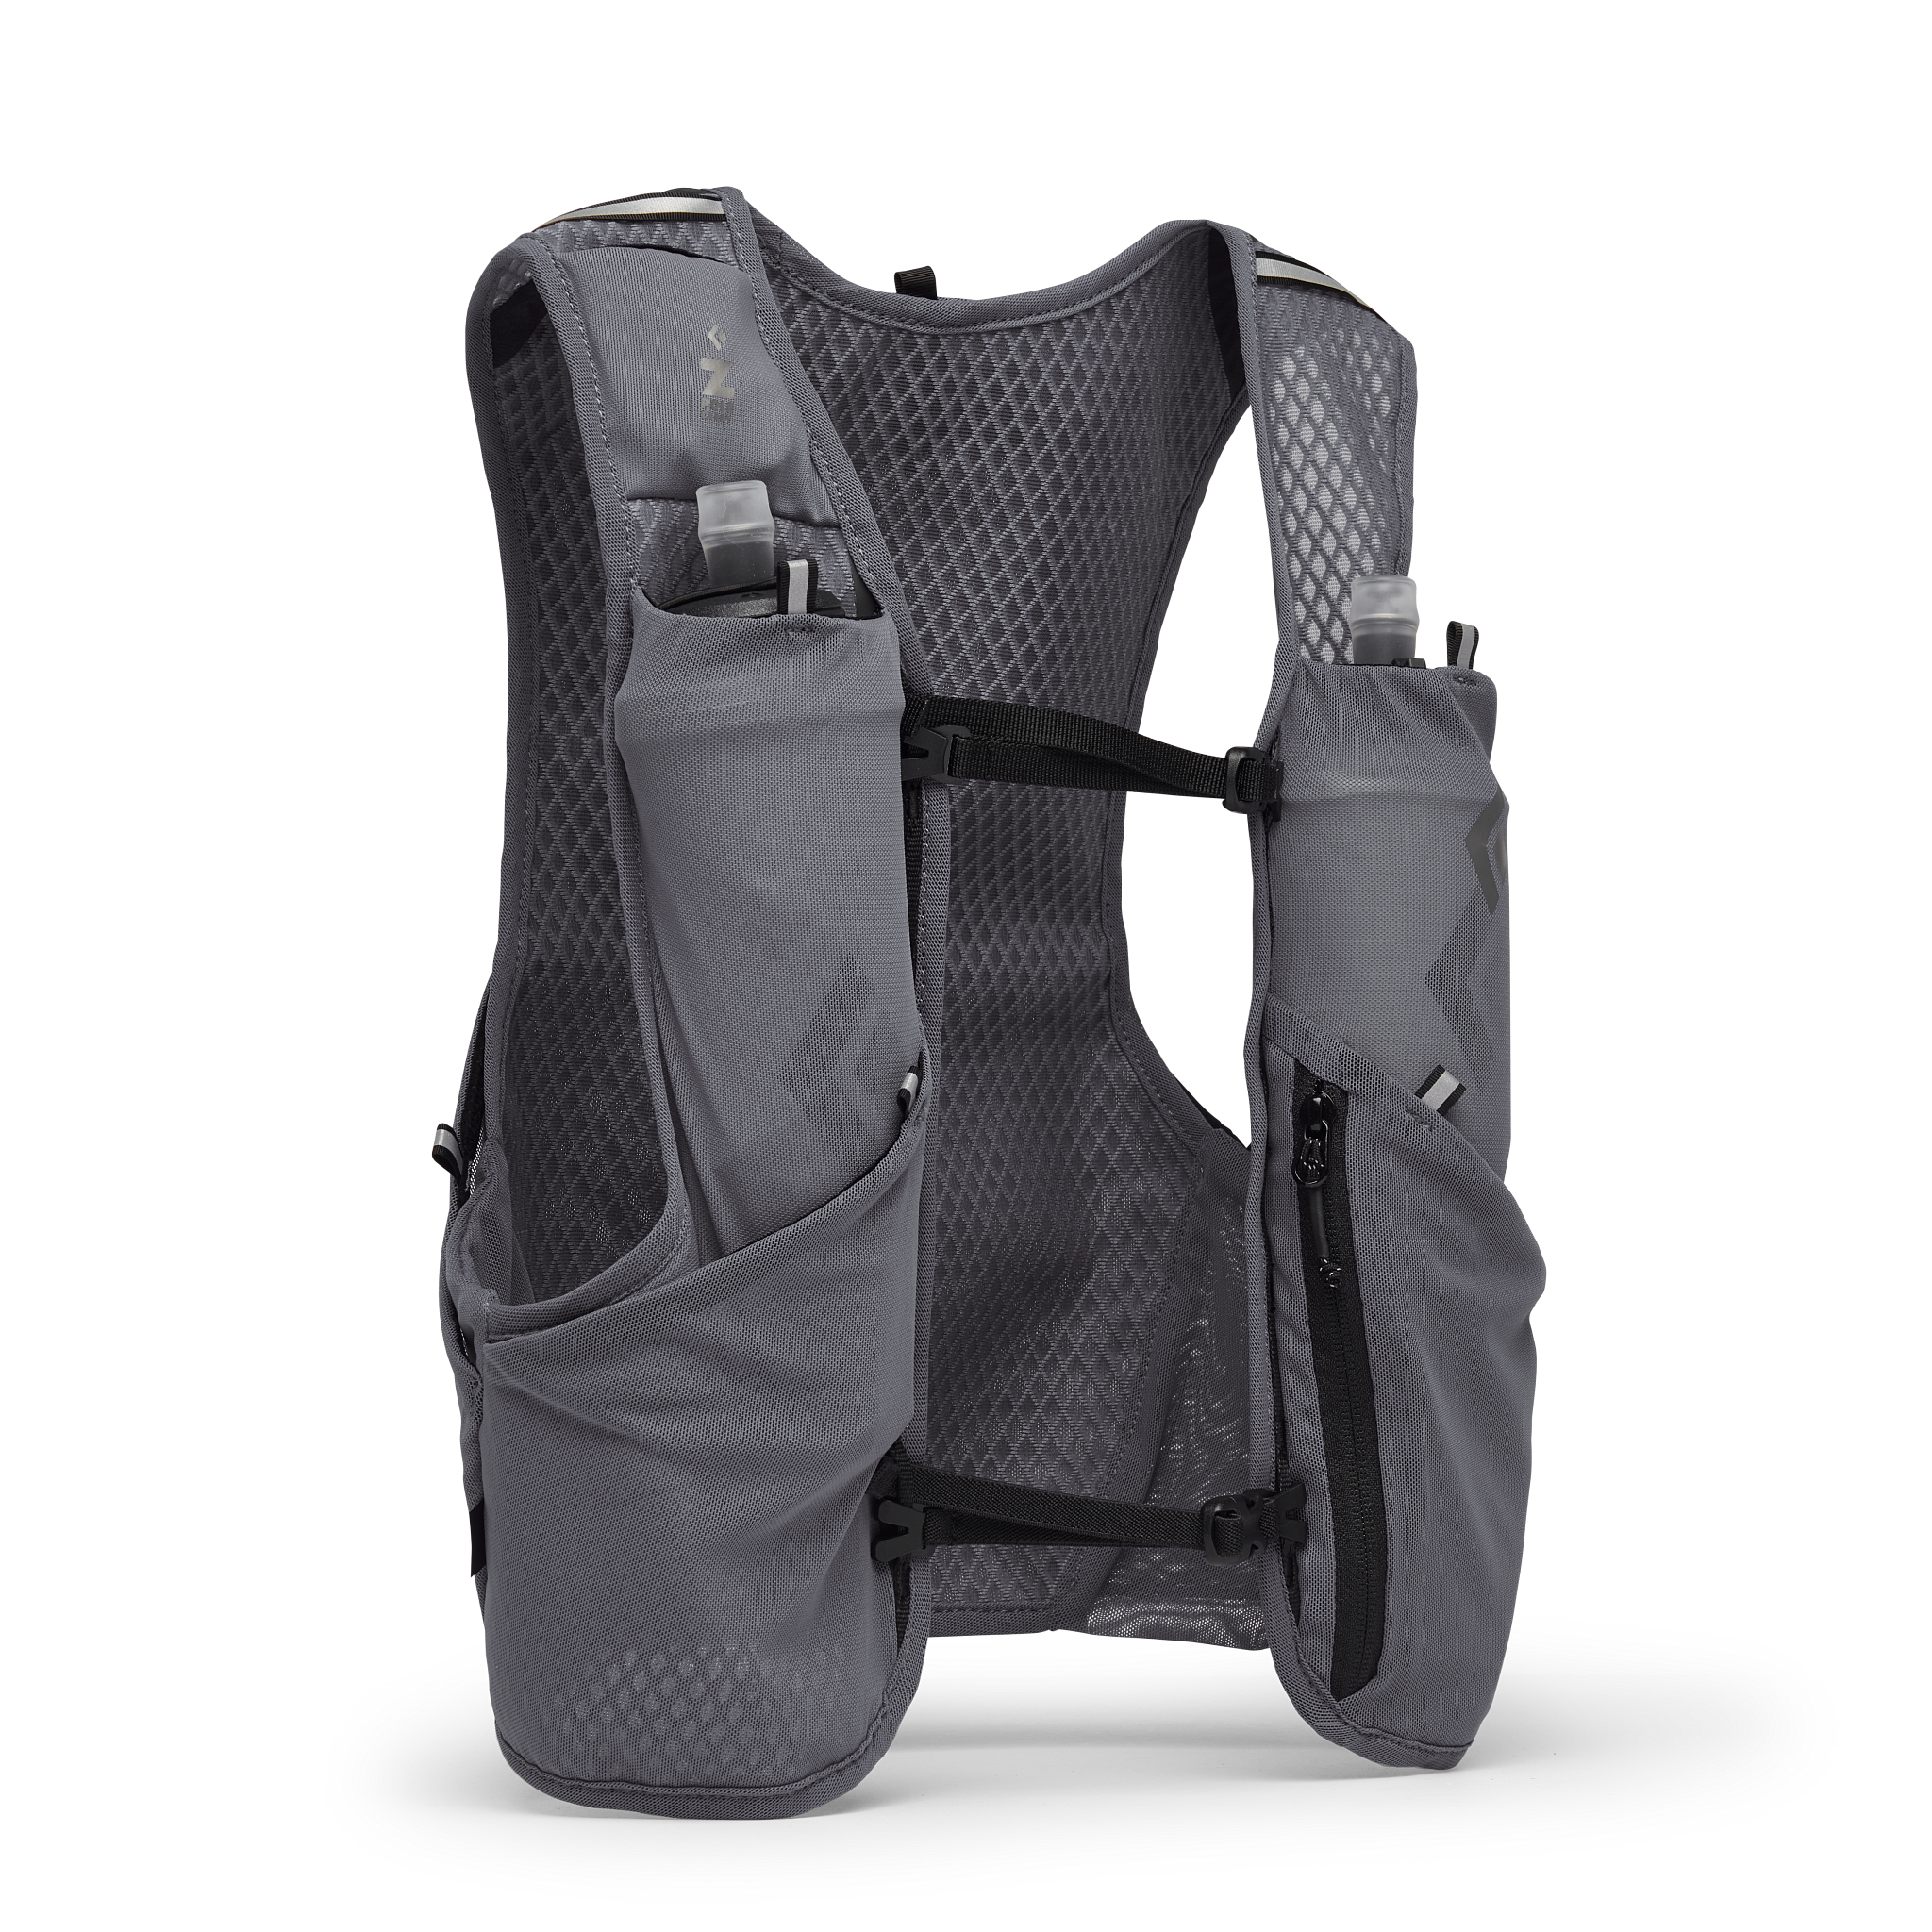 Black Diamond Equipment Distance 4 Hydration Vest Backpack, Small Carbon